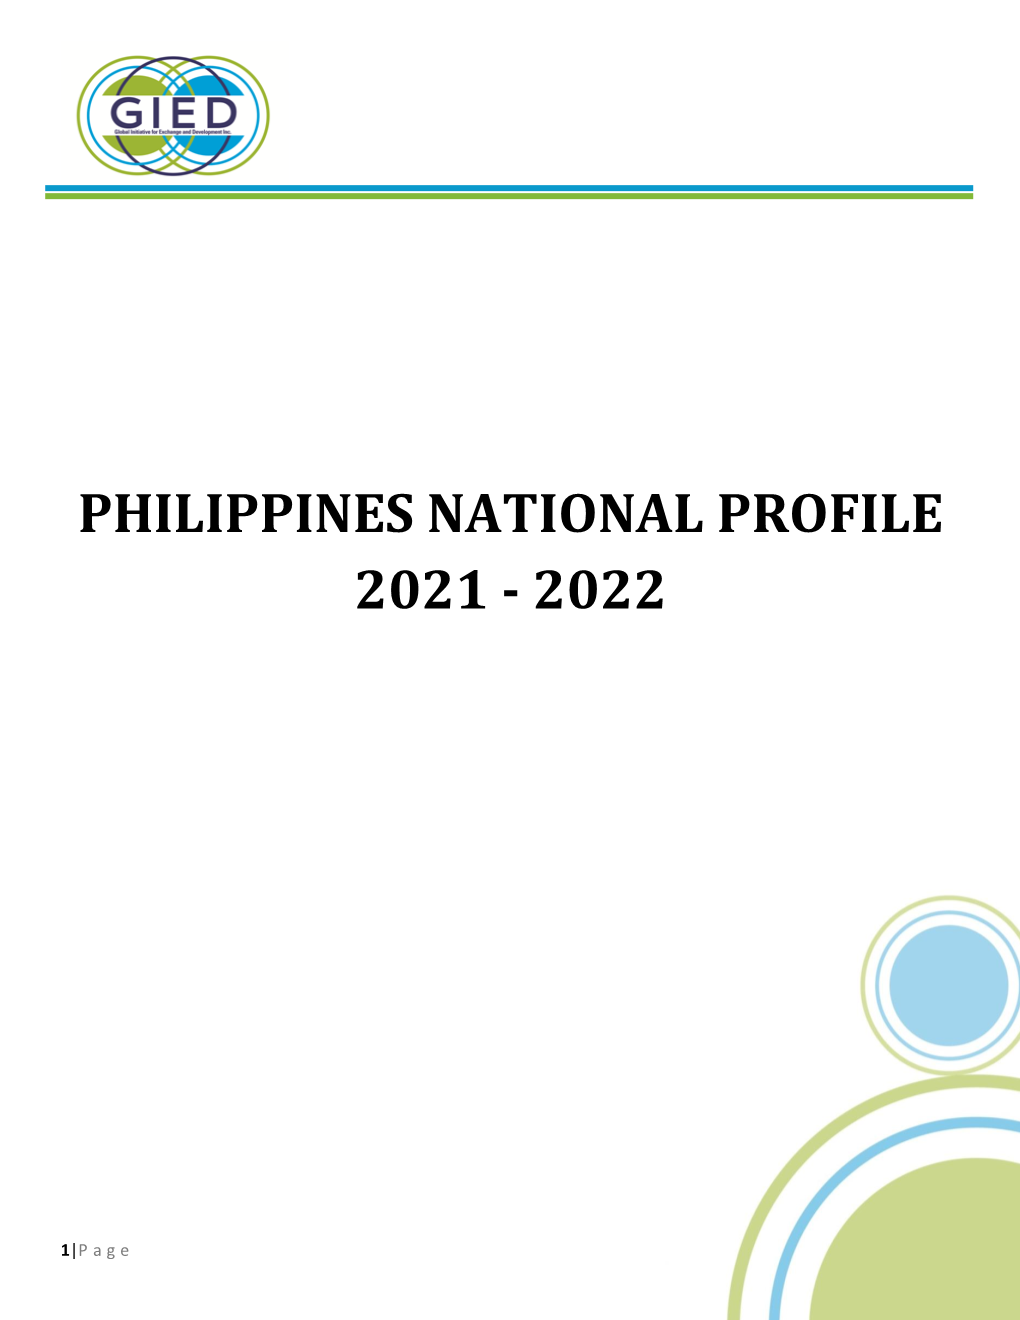 Philippines National Profile 2021 - 2022